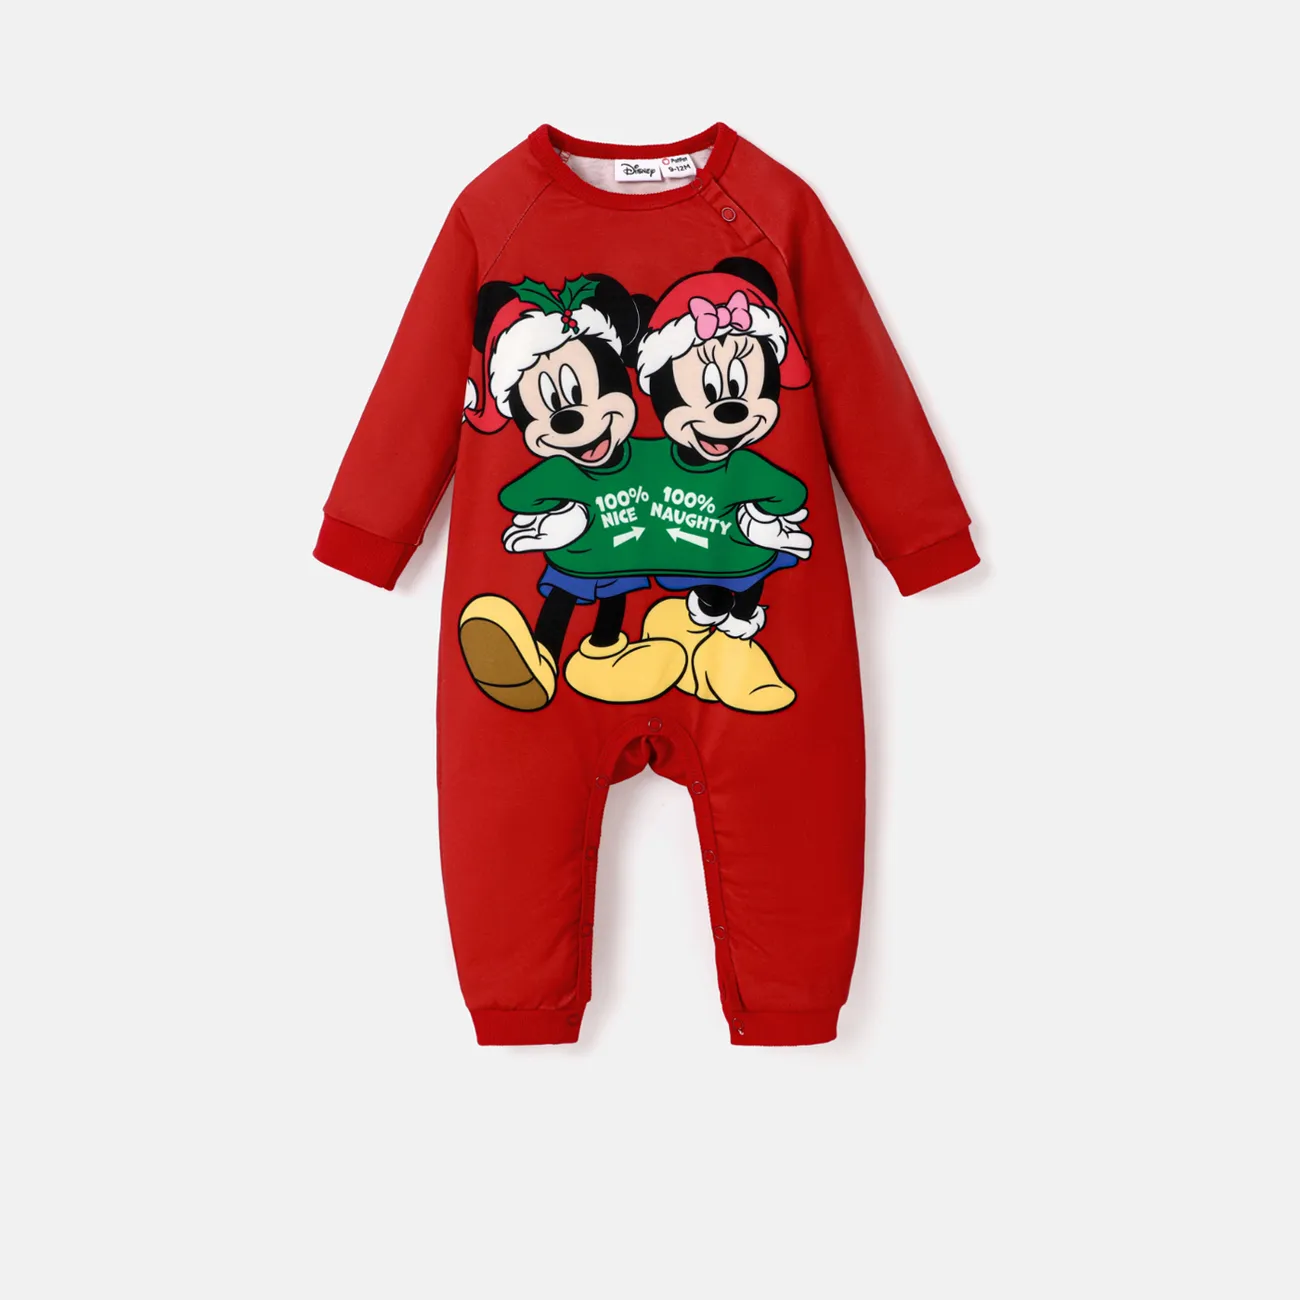 Disney Mickey and Friends Look Familial Noël Manches longues Tenues de famille assorties Hauts Rouge big image 1